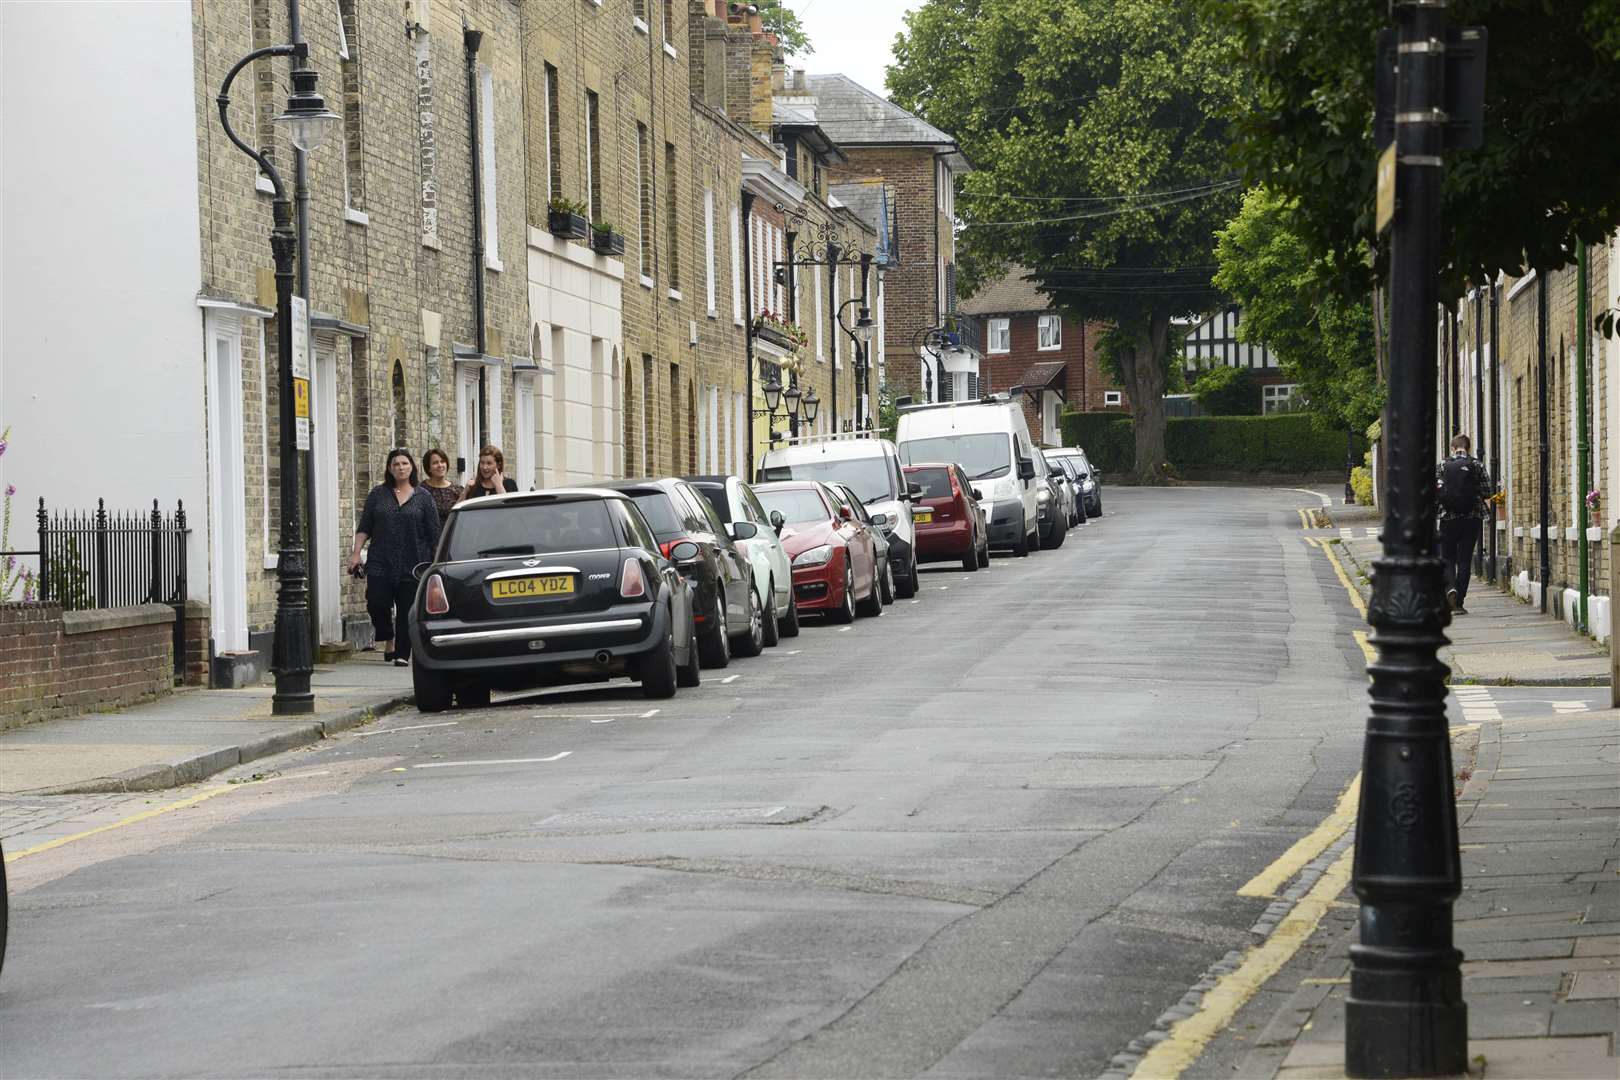 Orchard Street in Canterbury is one of the roads Mr Vye believes should have a 20mph limit